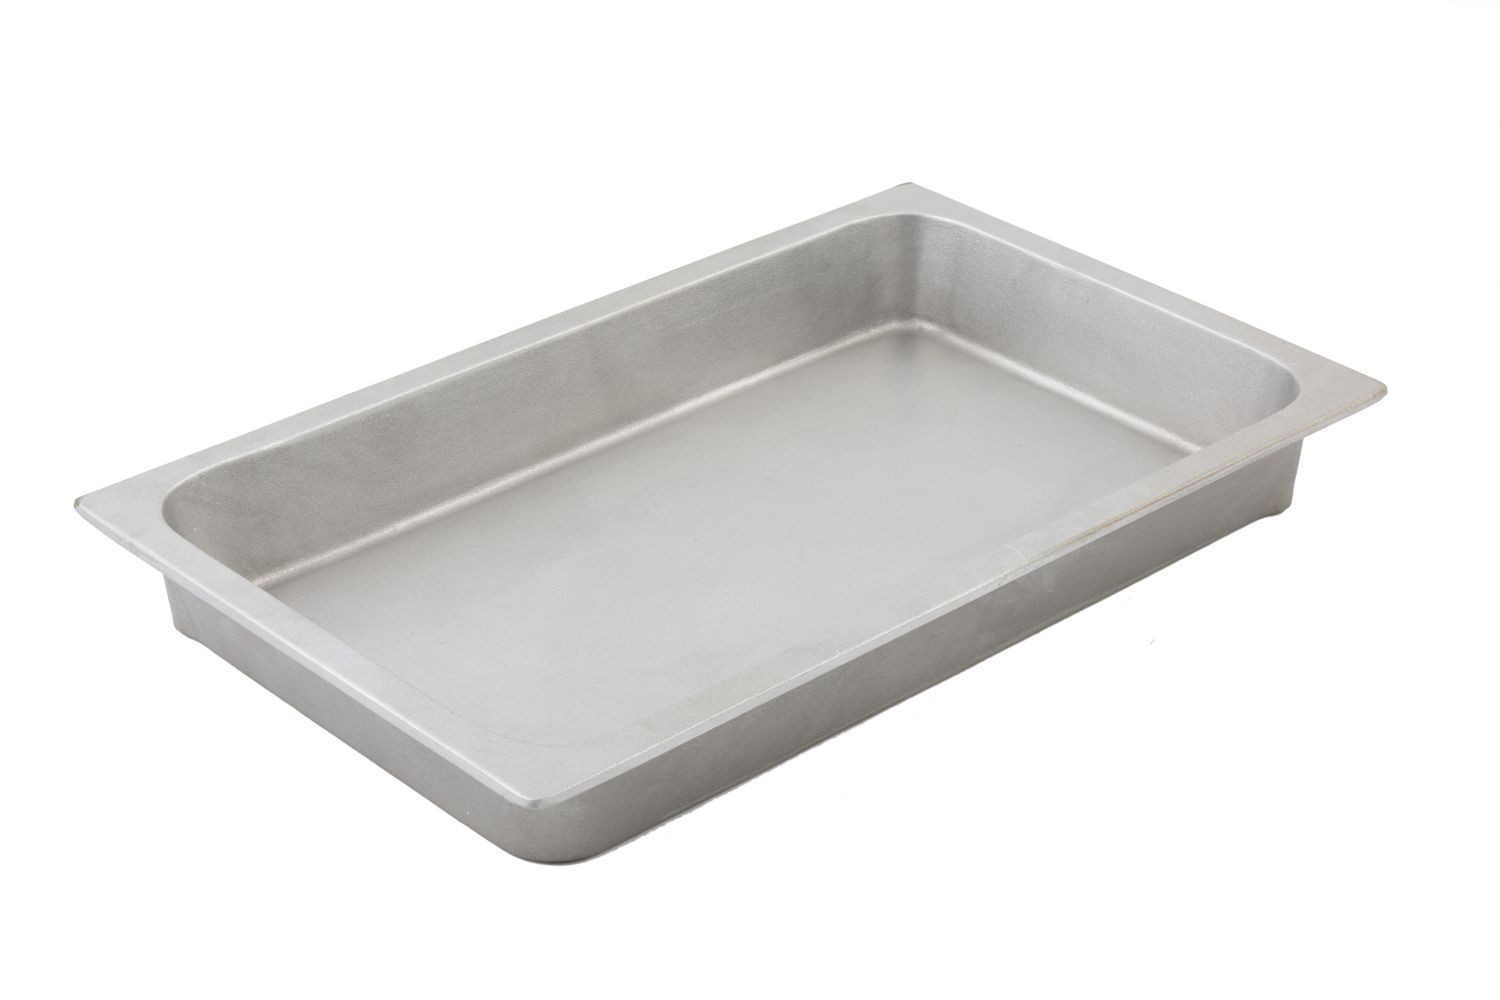 Bon Chef 5066P Full-Size Chafer Food Pan, Pewter Glo 21 x 13 x 2